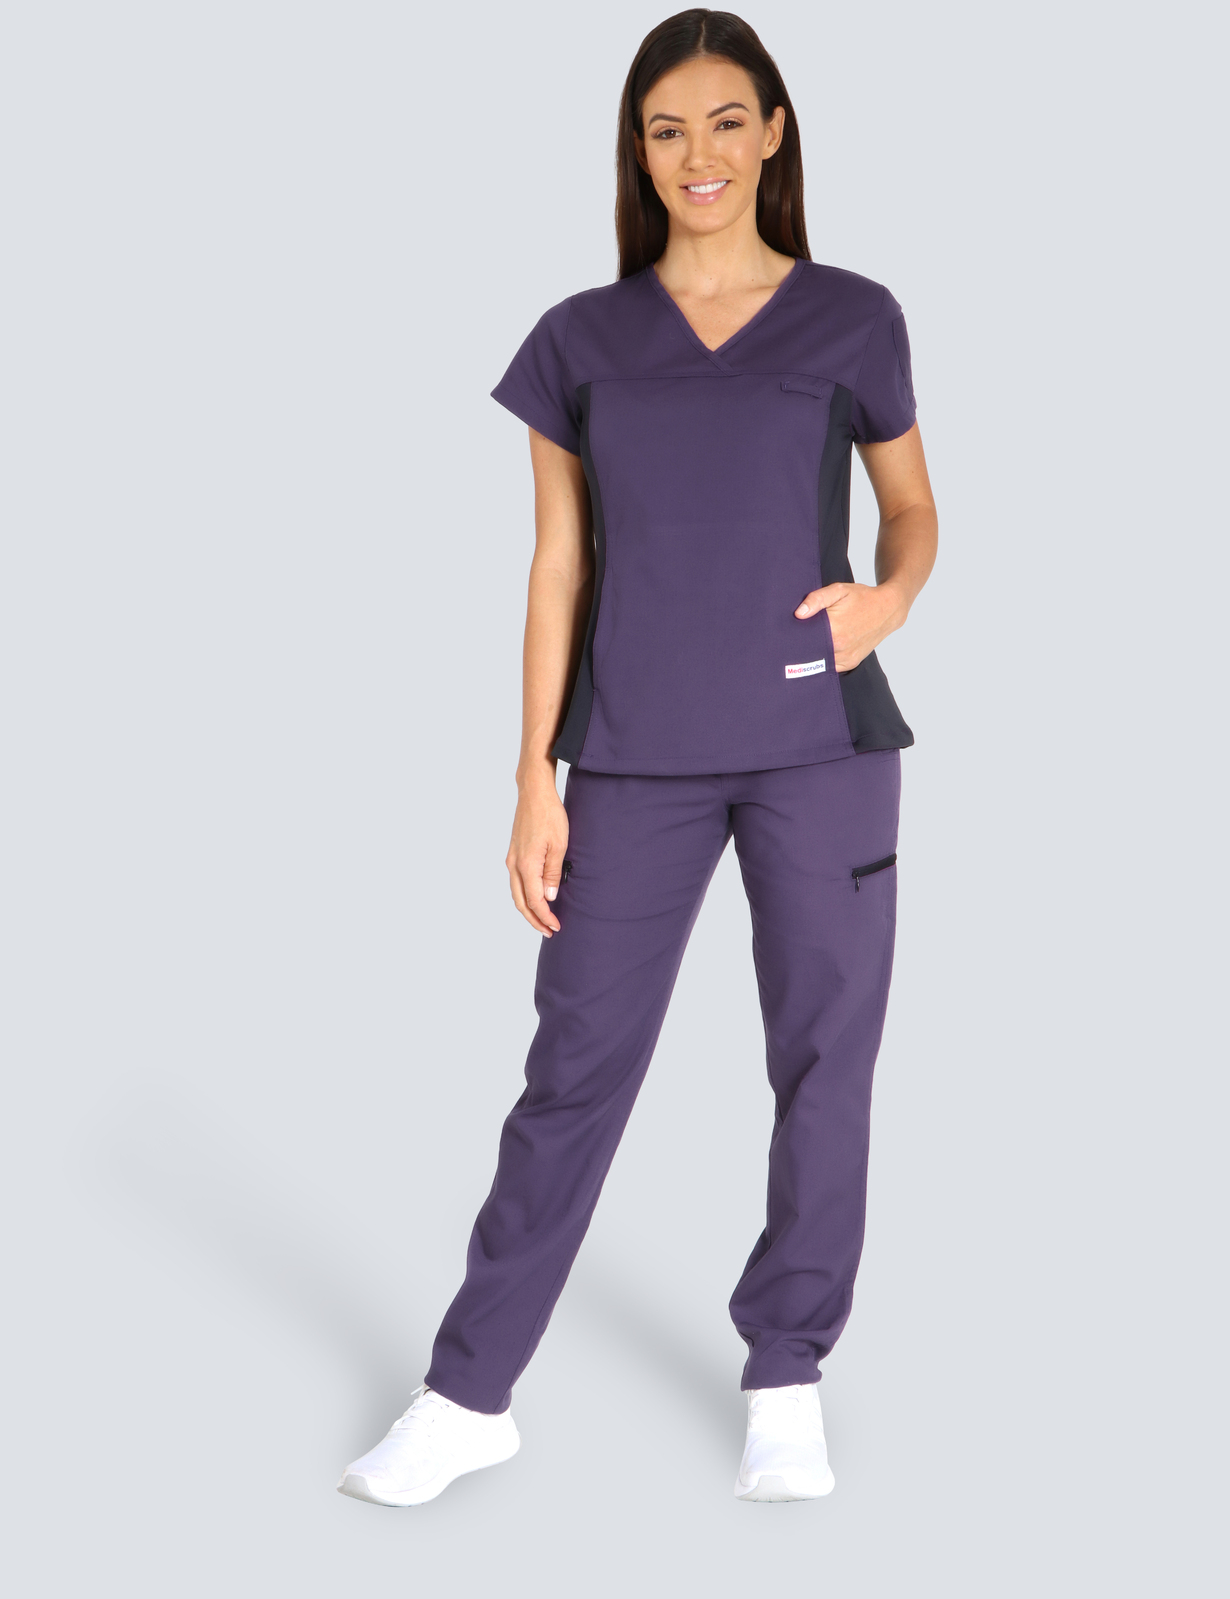 Toowoomba Hospital Administration Officer Uniform Set Bundle (Women's Fit Spandex Top and Cargo pants in Aubergine + Logo) 